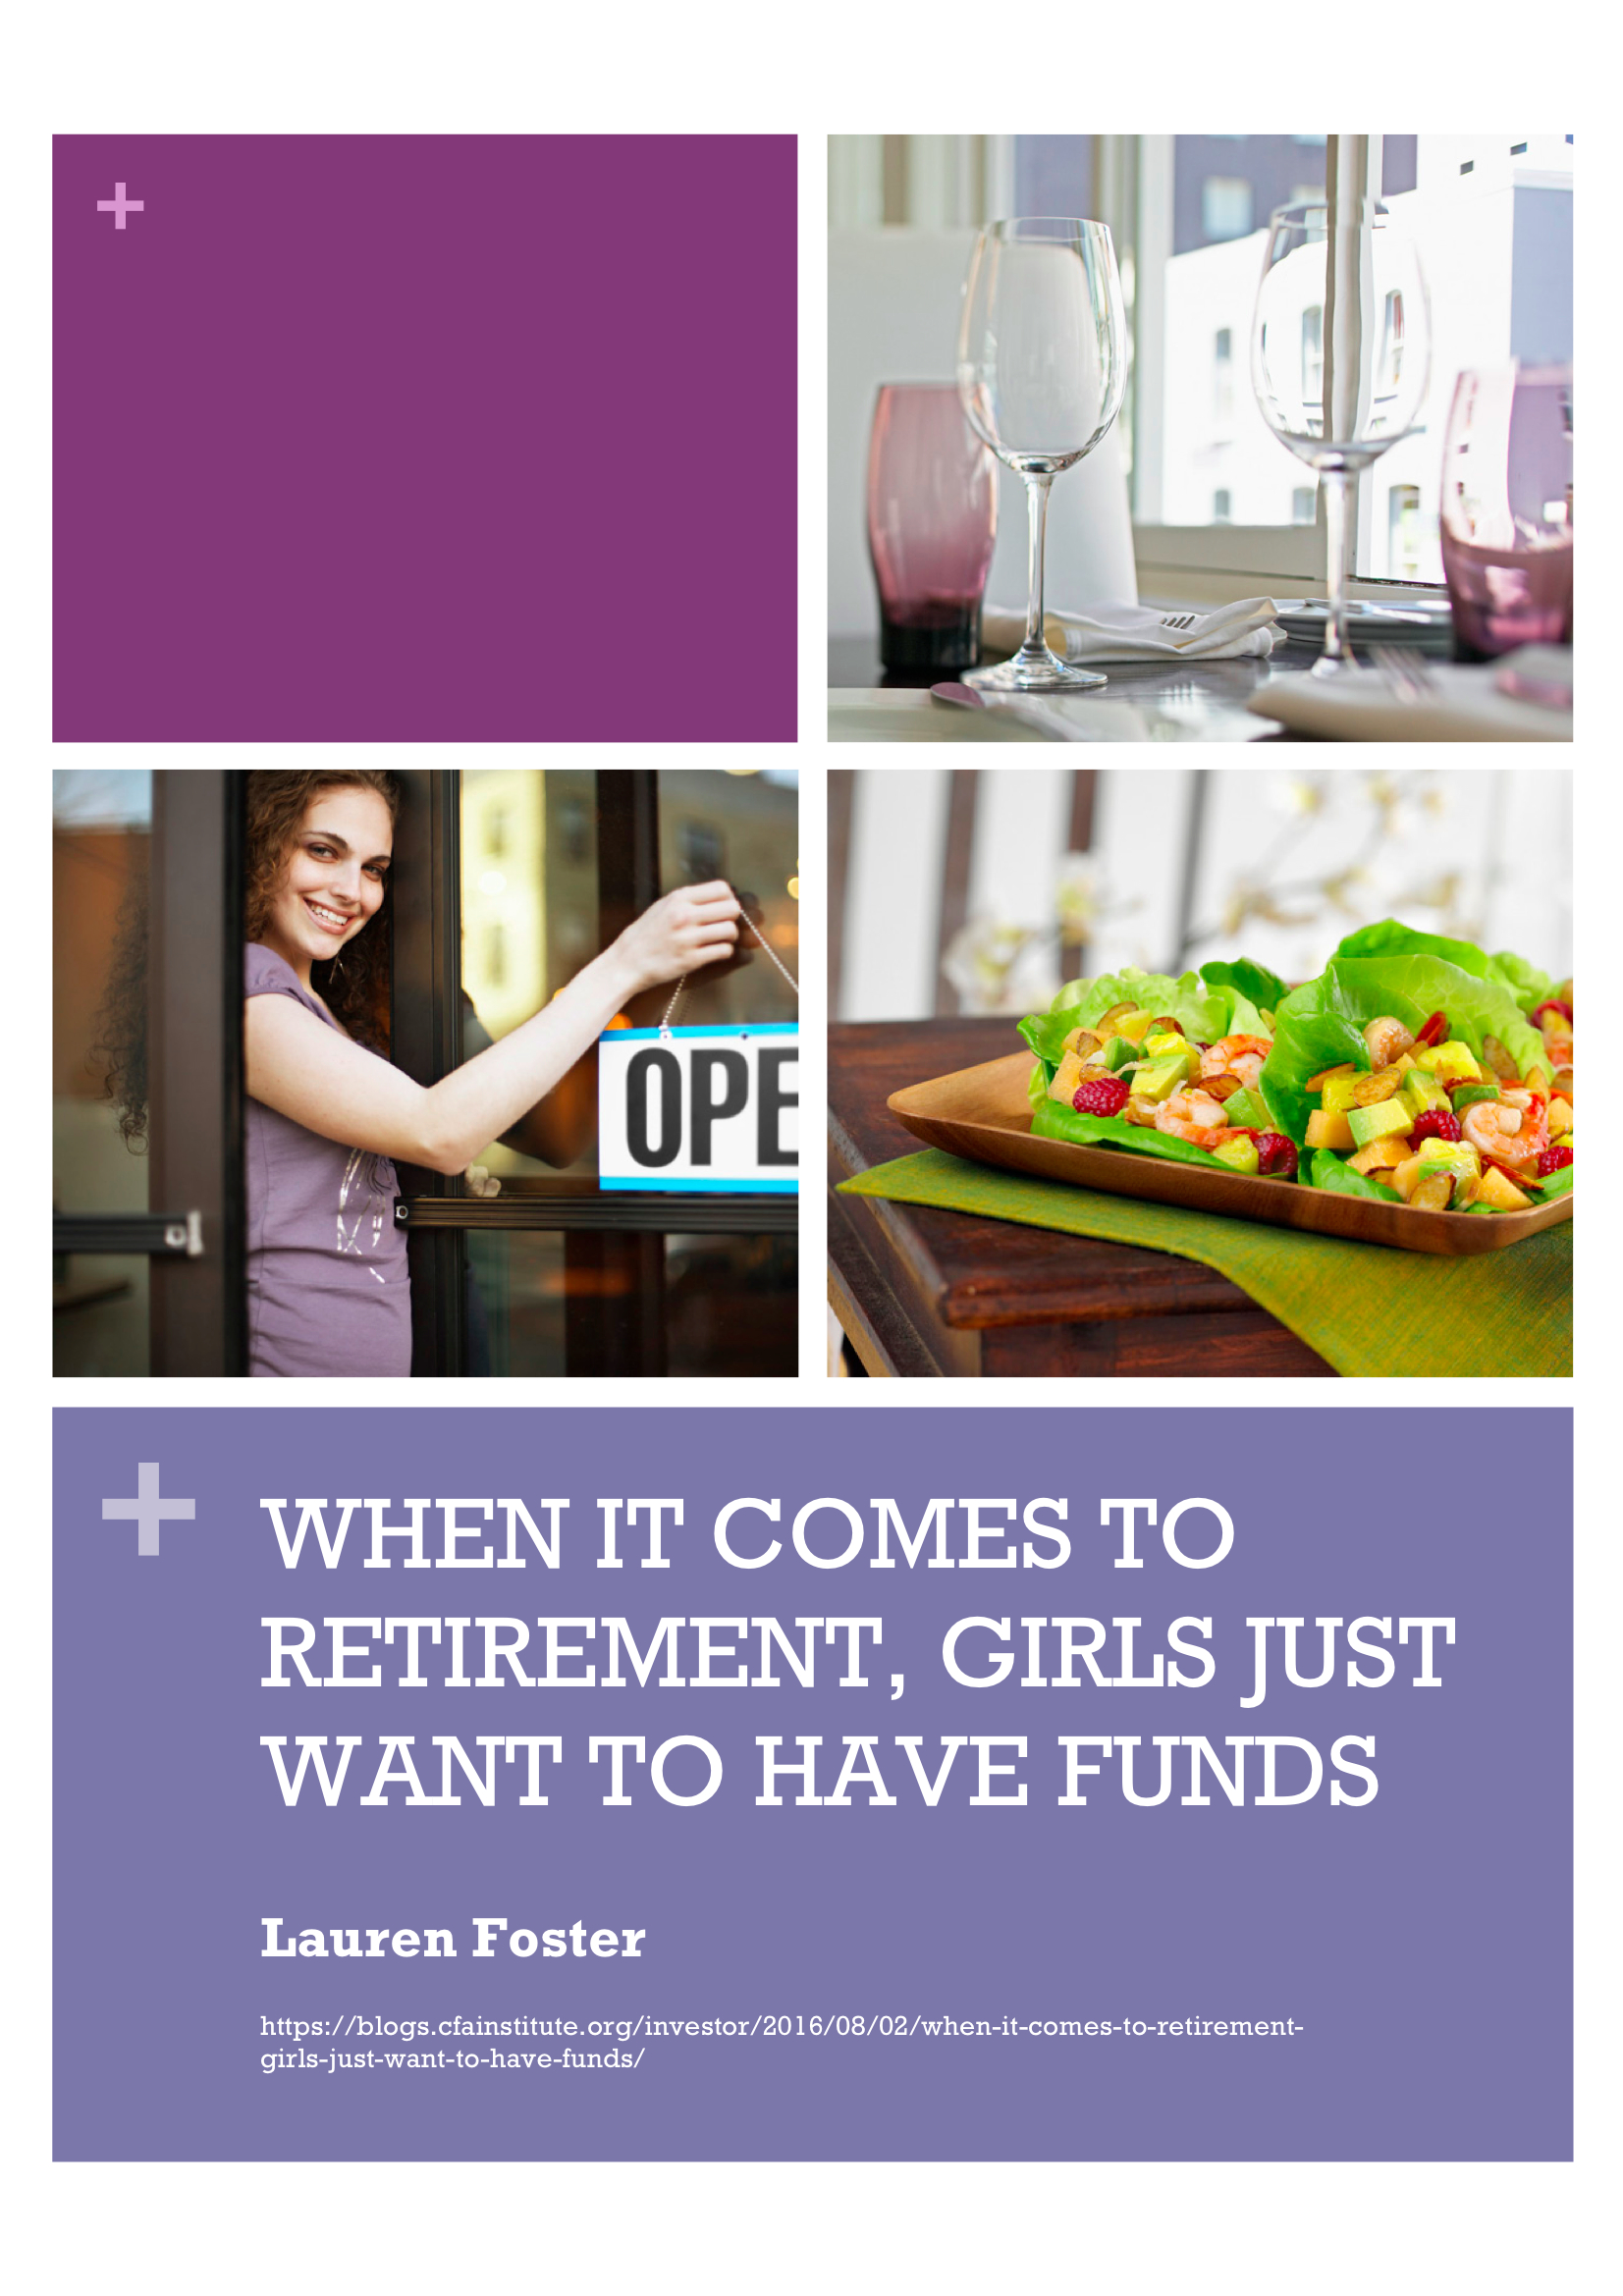 When It Comes to Retirement, Girls Just Want to Have Funds